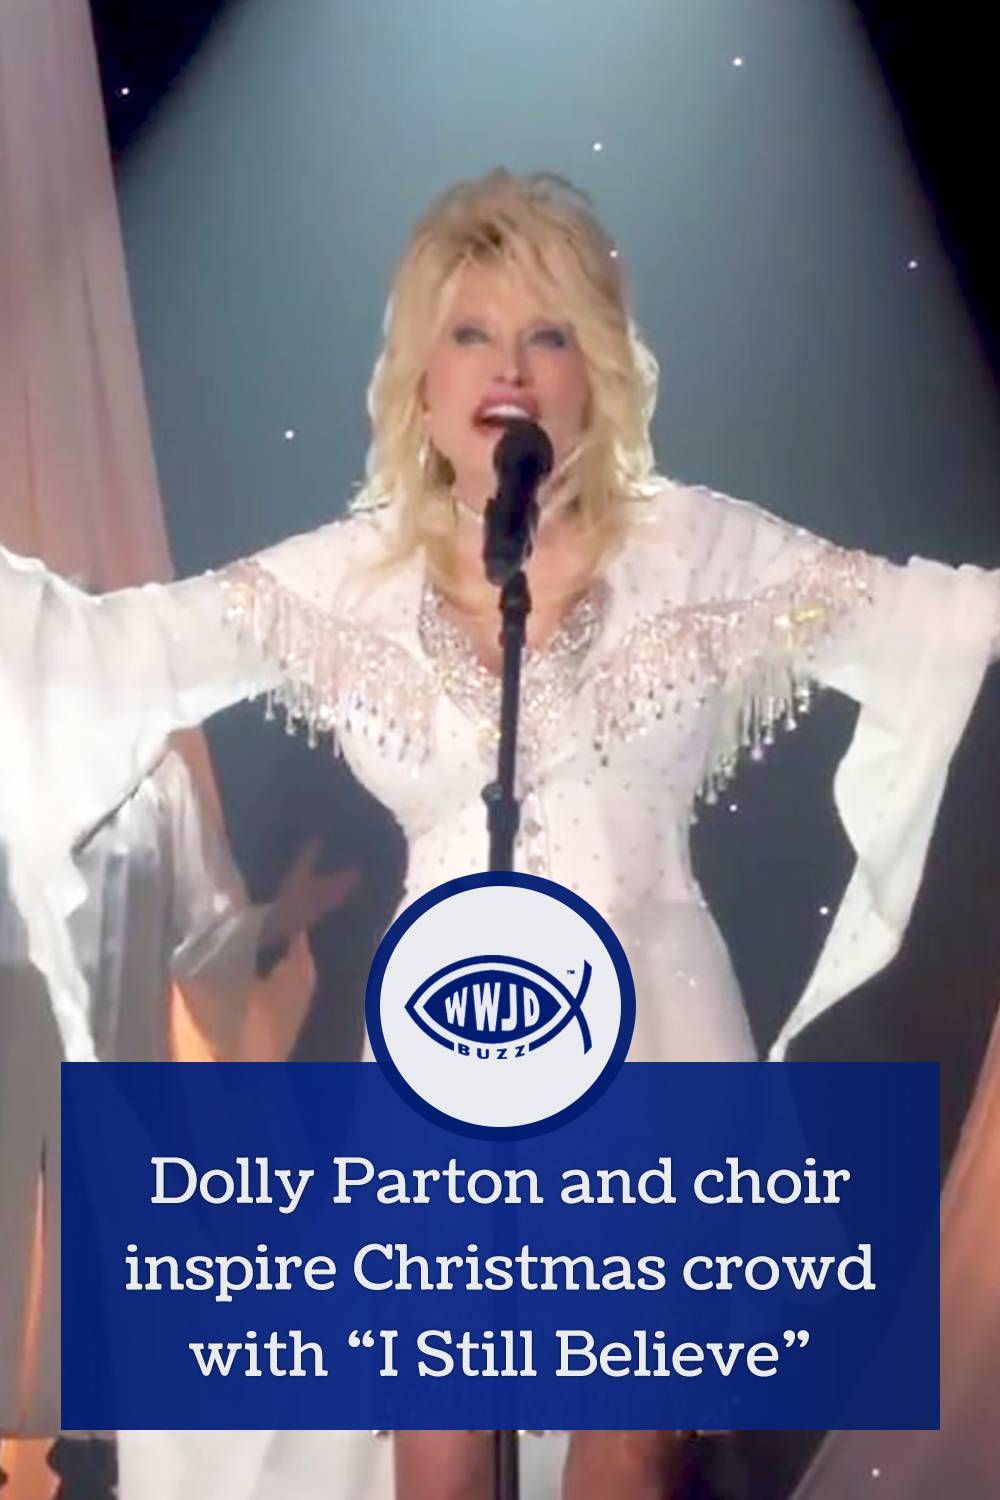 Dolly Parton and choir inspire Christmas crowd with “I Still Believe”